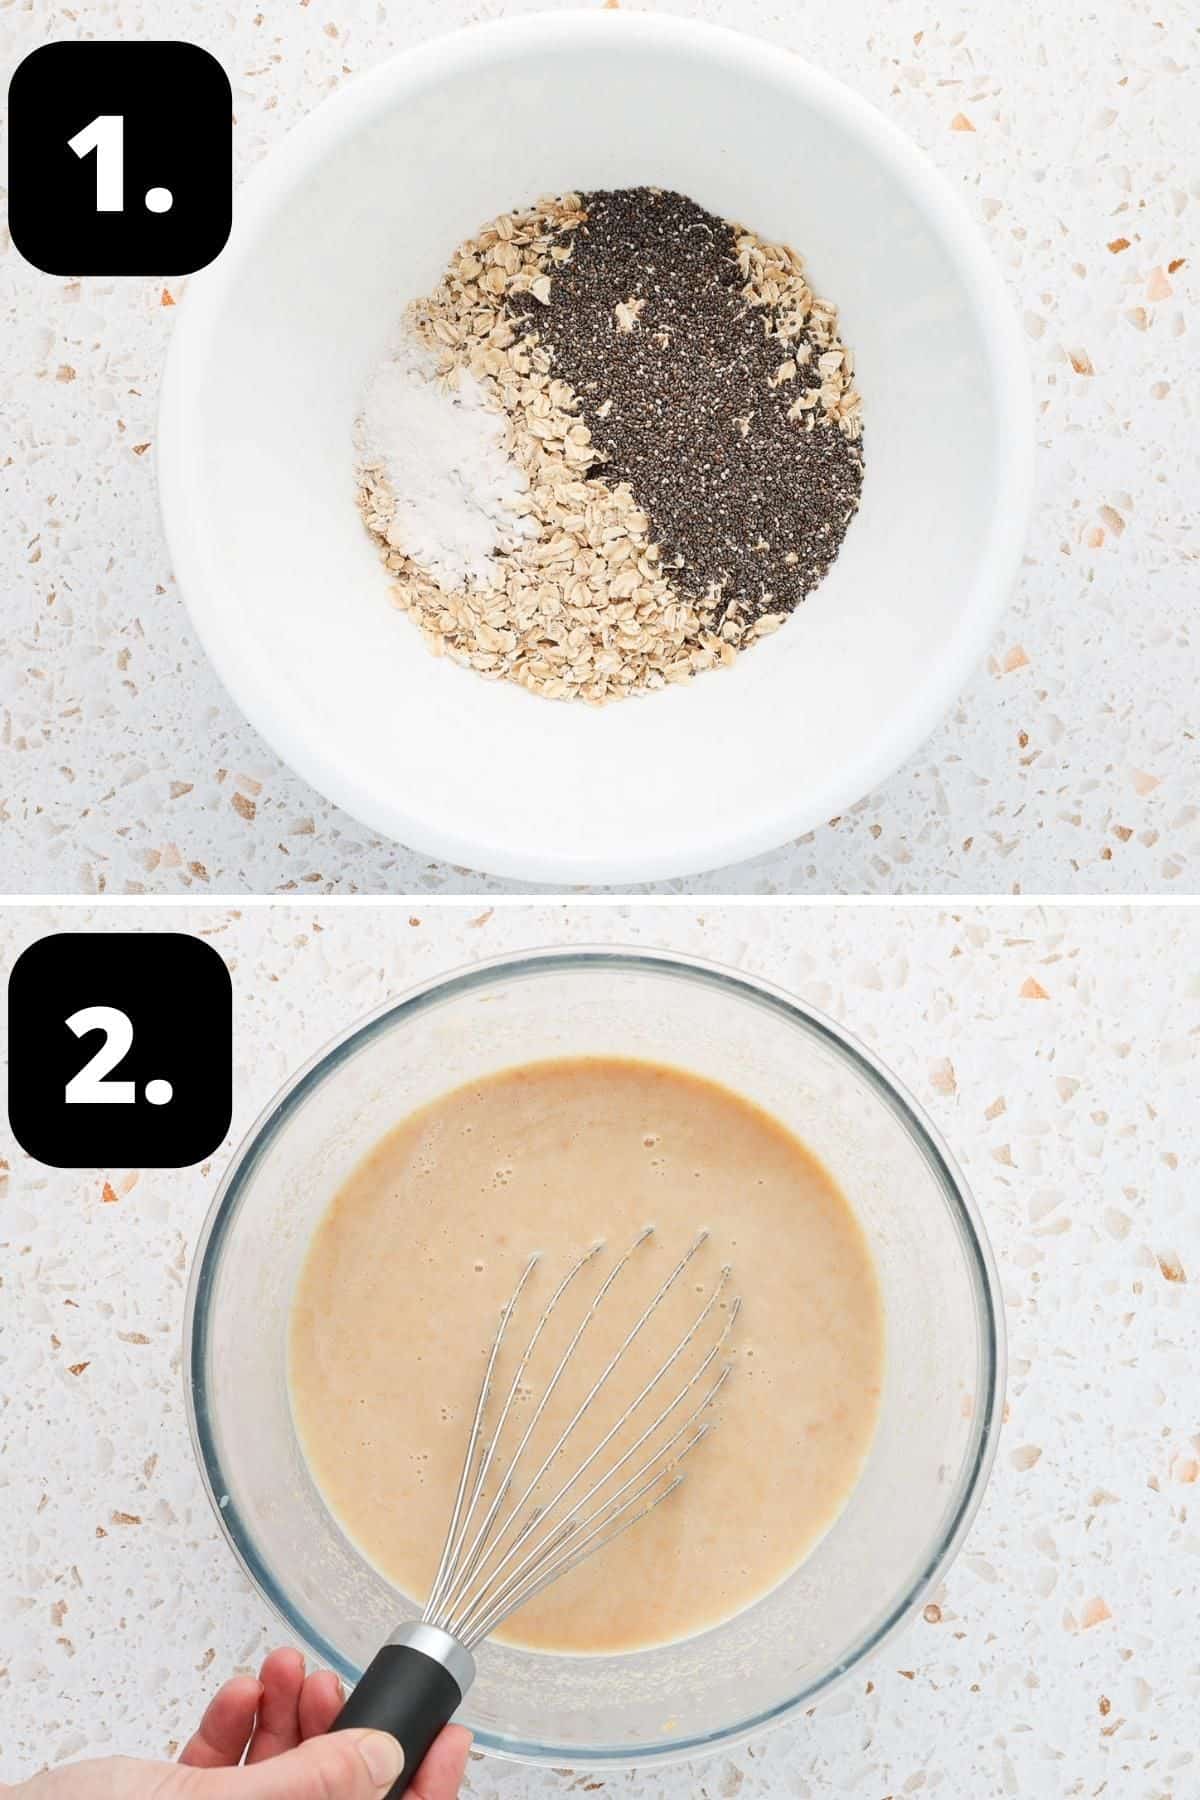 Steps 1-2 of preparing this recipe - the dry ingredients in one bowl and mixing the wet ingredients in another bowl.